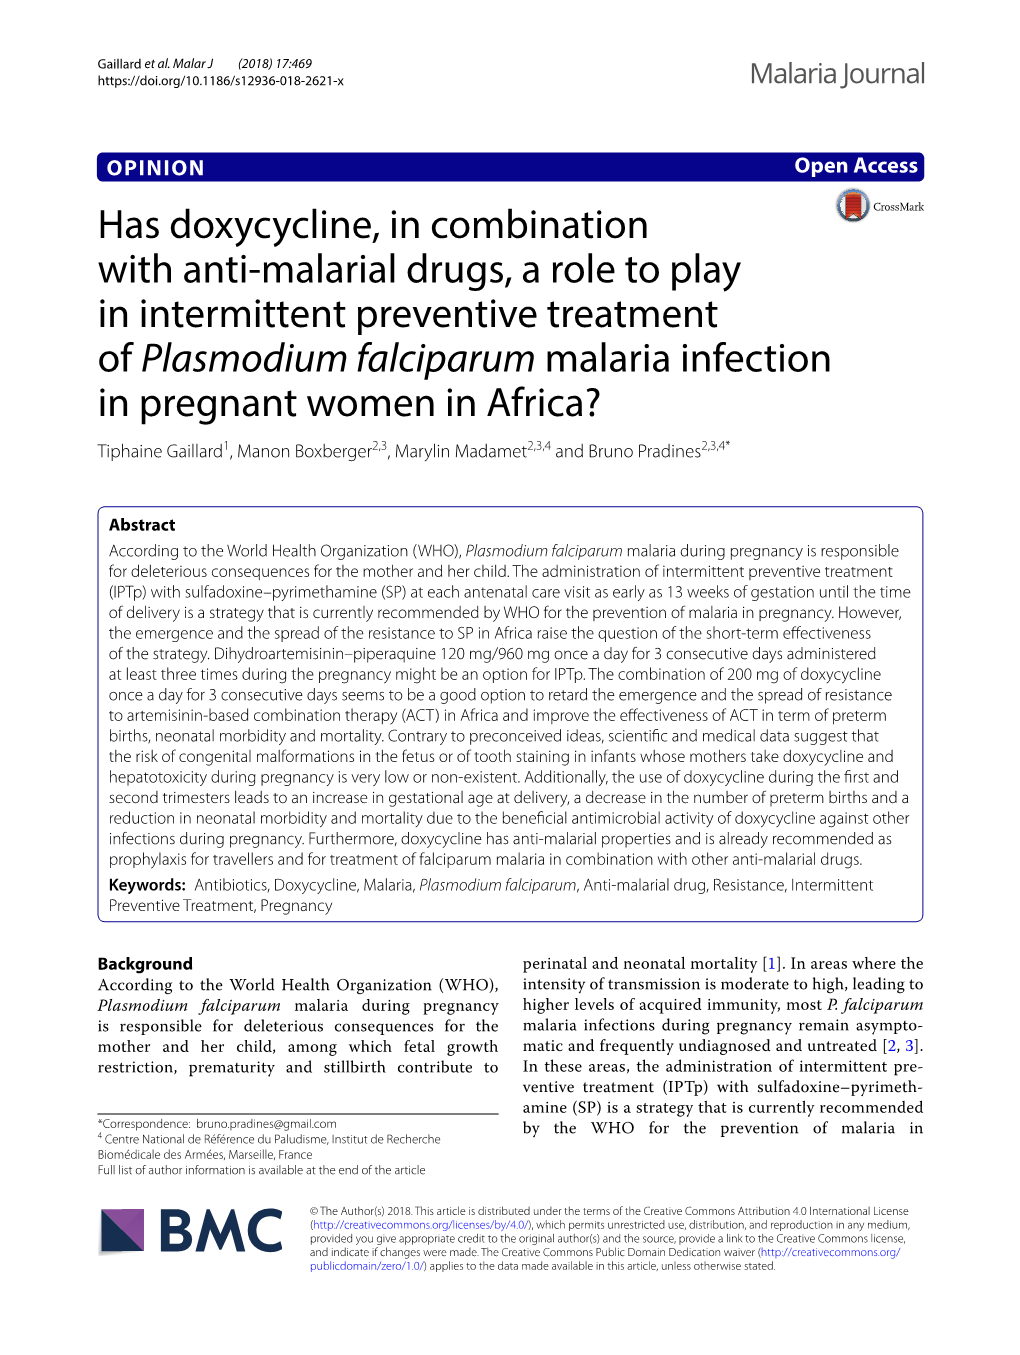 Has Doxycycline, in Combination with Anti-Malarial Drugs, a Role to Play In